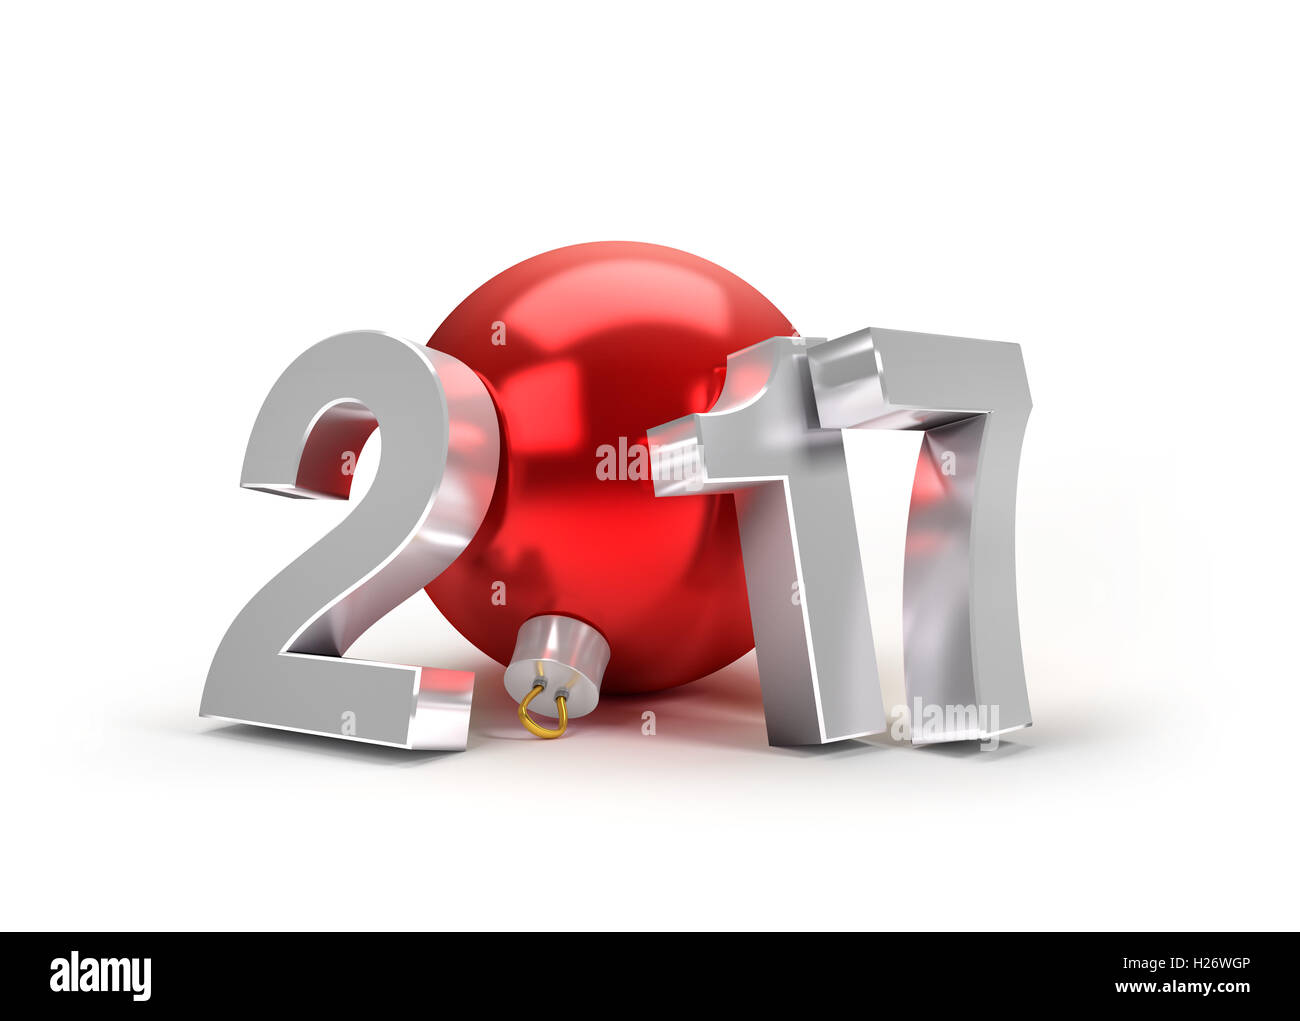 New Year 2017 type with a red christmas ball - 3D illustration Stock Photo